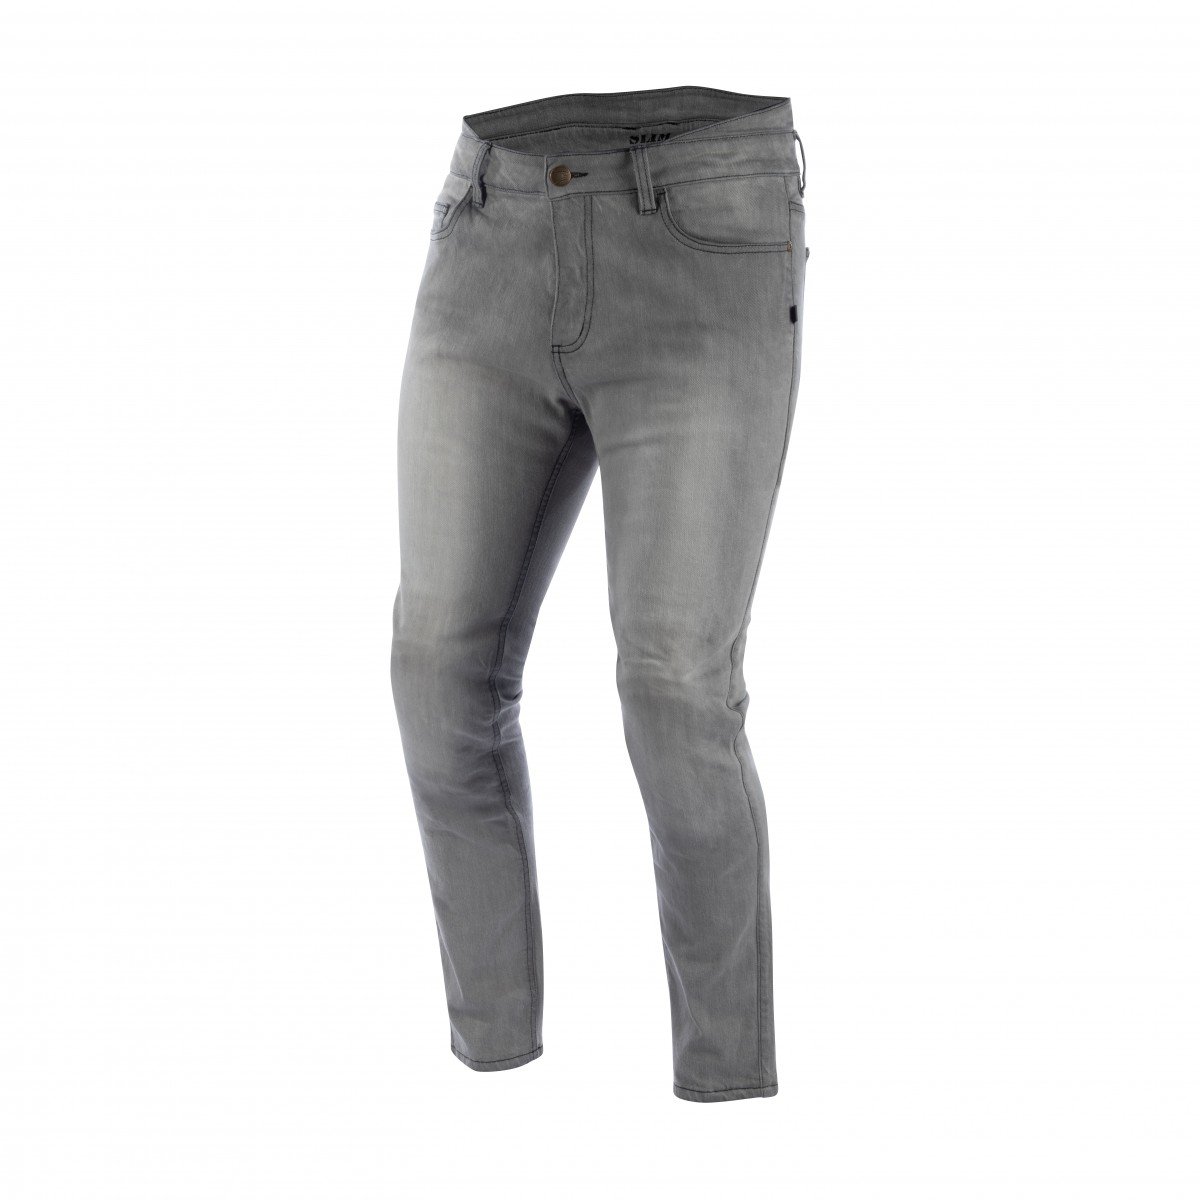 Image of Bering Trousers Twinner Grey Size M ID 3660815168356